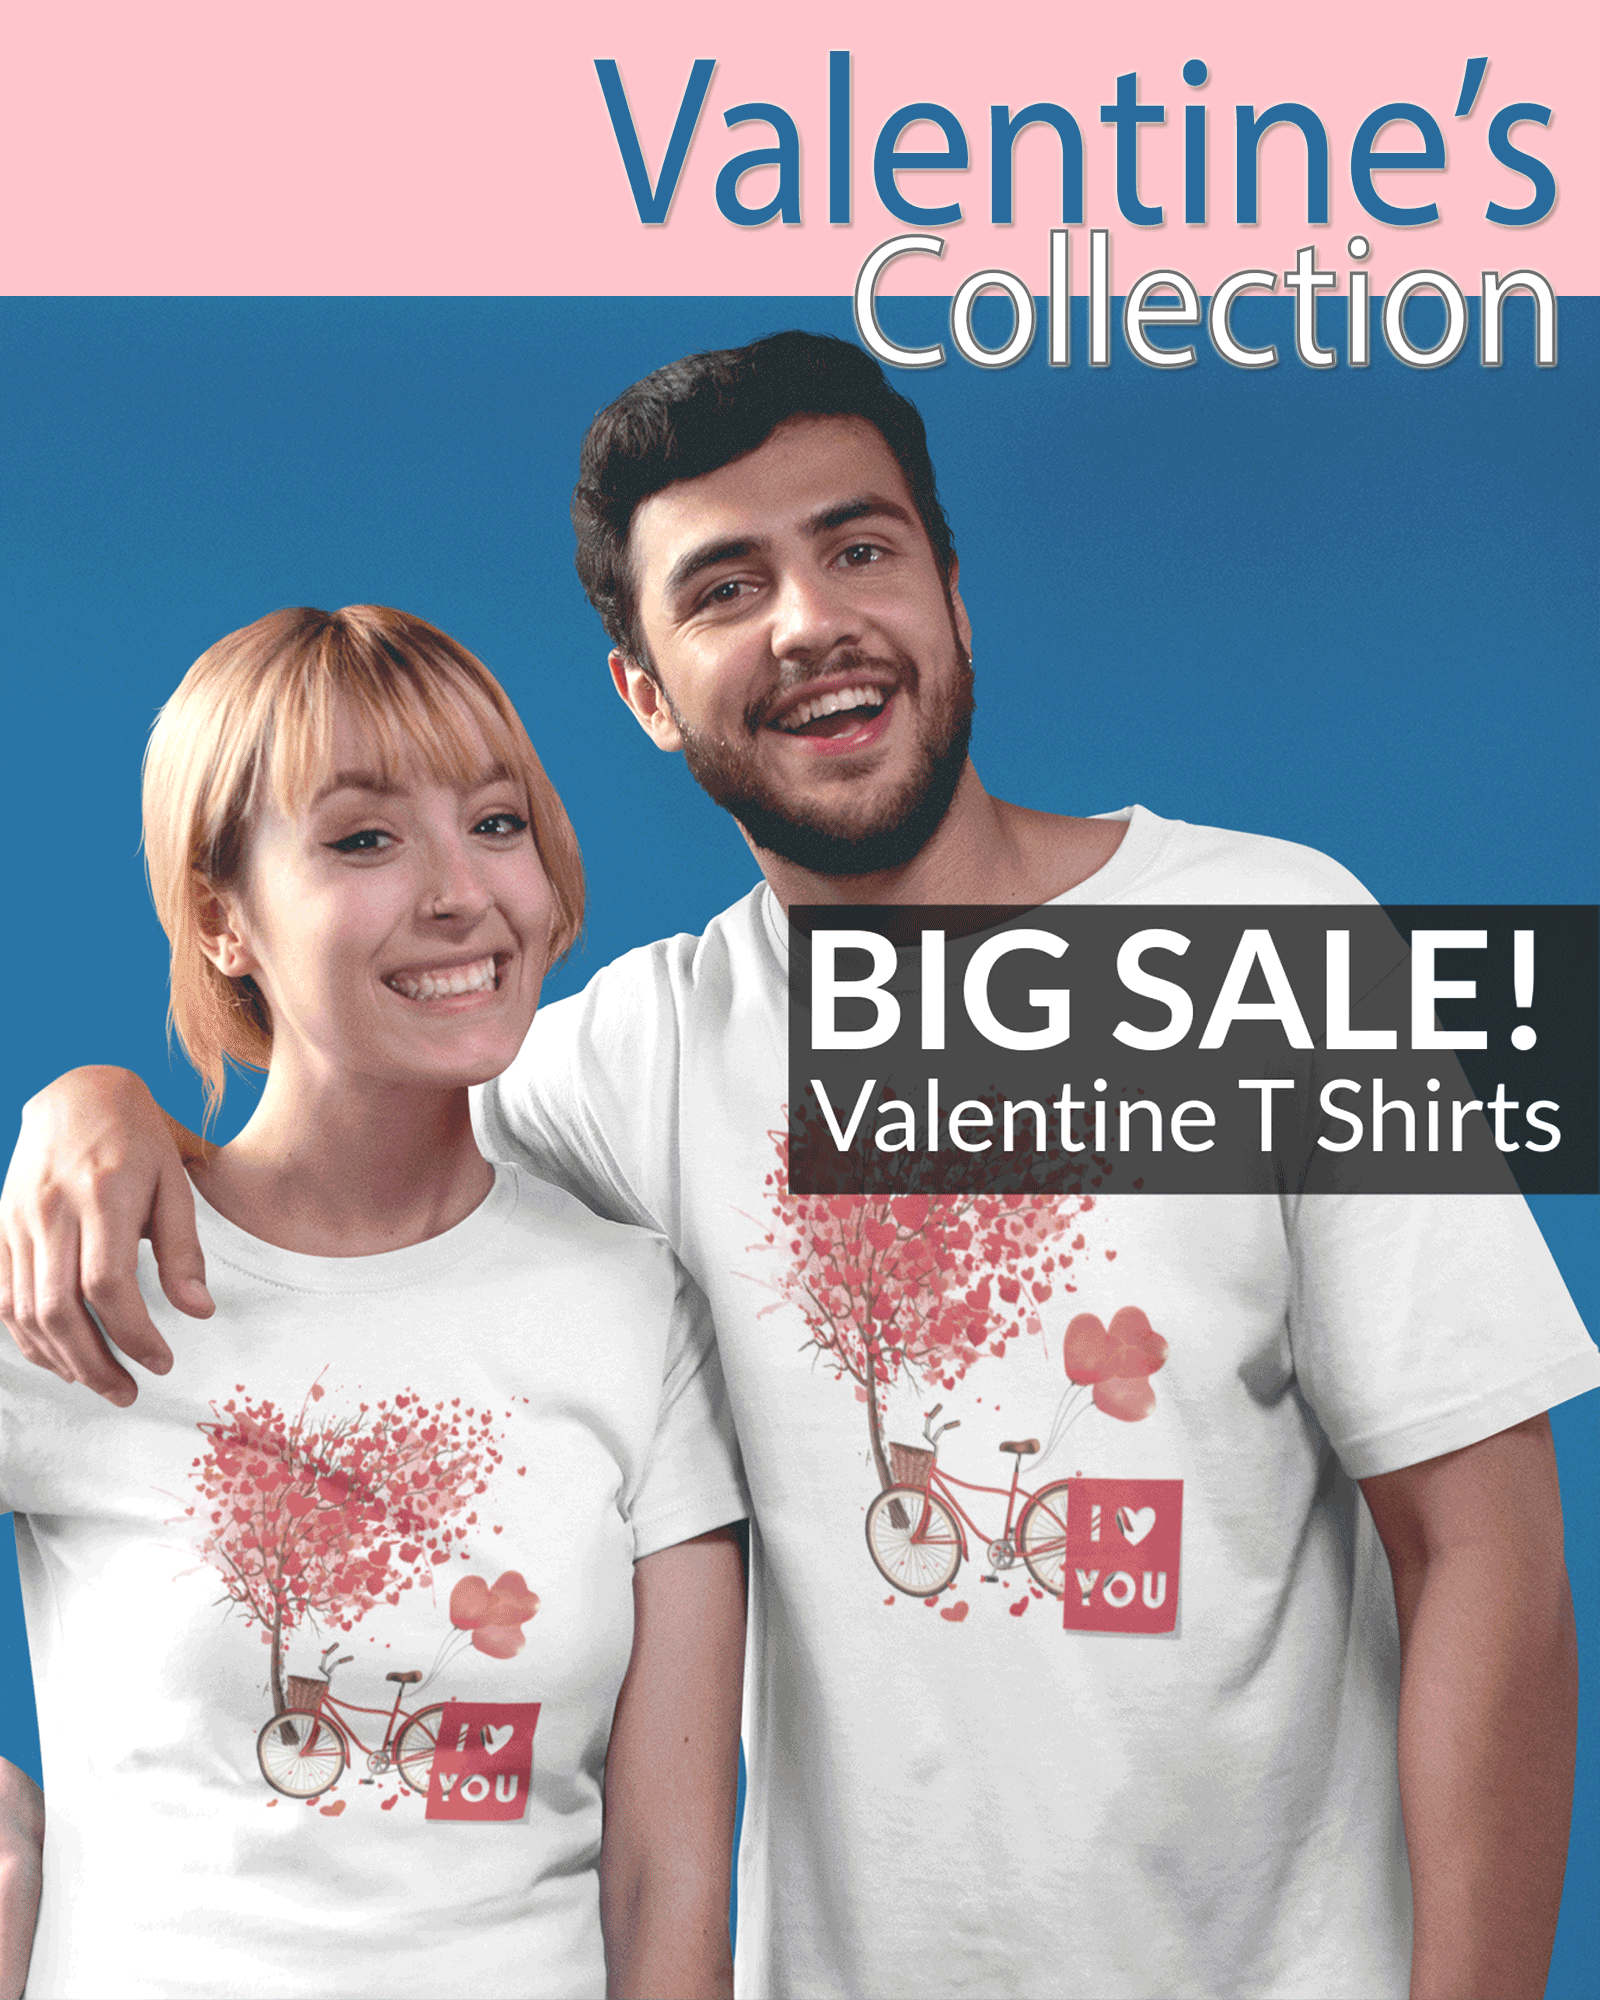 I Love You Couple Valentine T Shirt Collection by Bratma